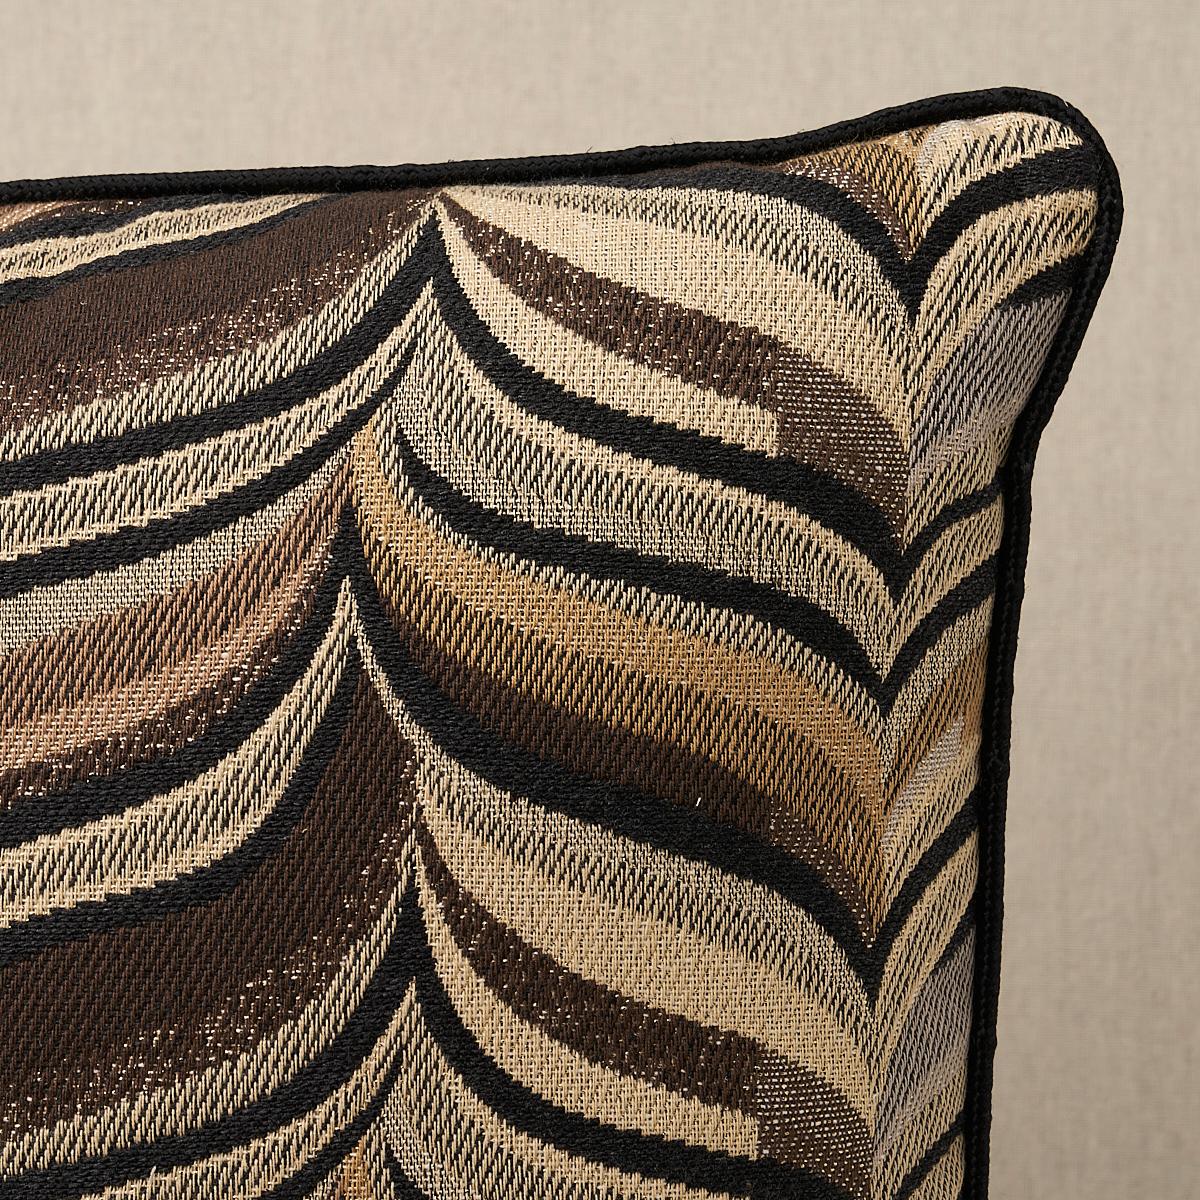 This pillow features Loulou. An elegant abstract design inspired by classic bargello tapestries, Loulou fabric in smoky quartz is a textural tour de force that combines several different weave structures for a stunning effect. Pillow is finished